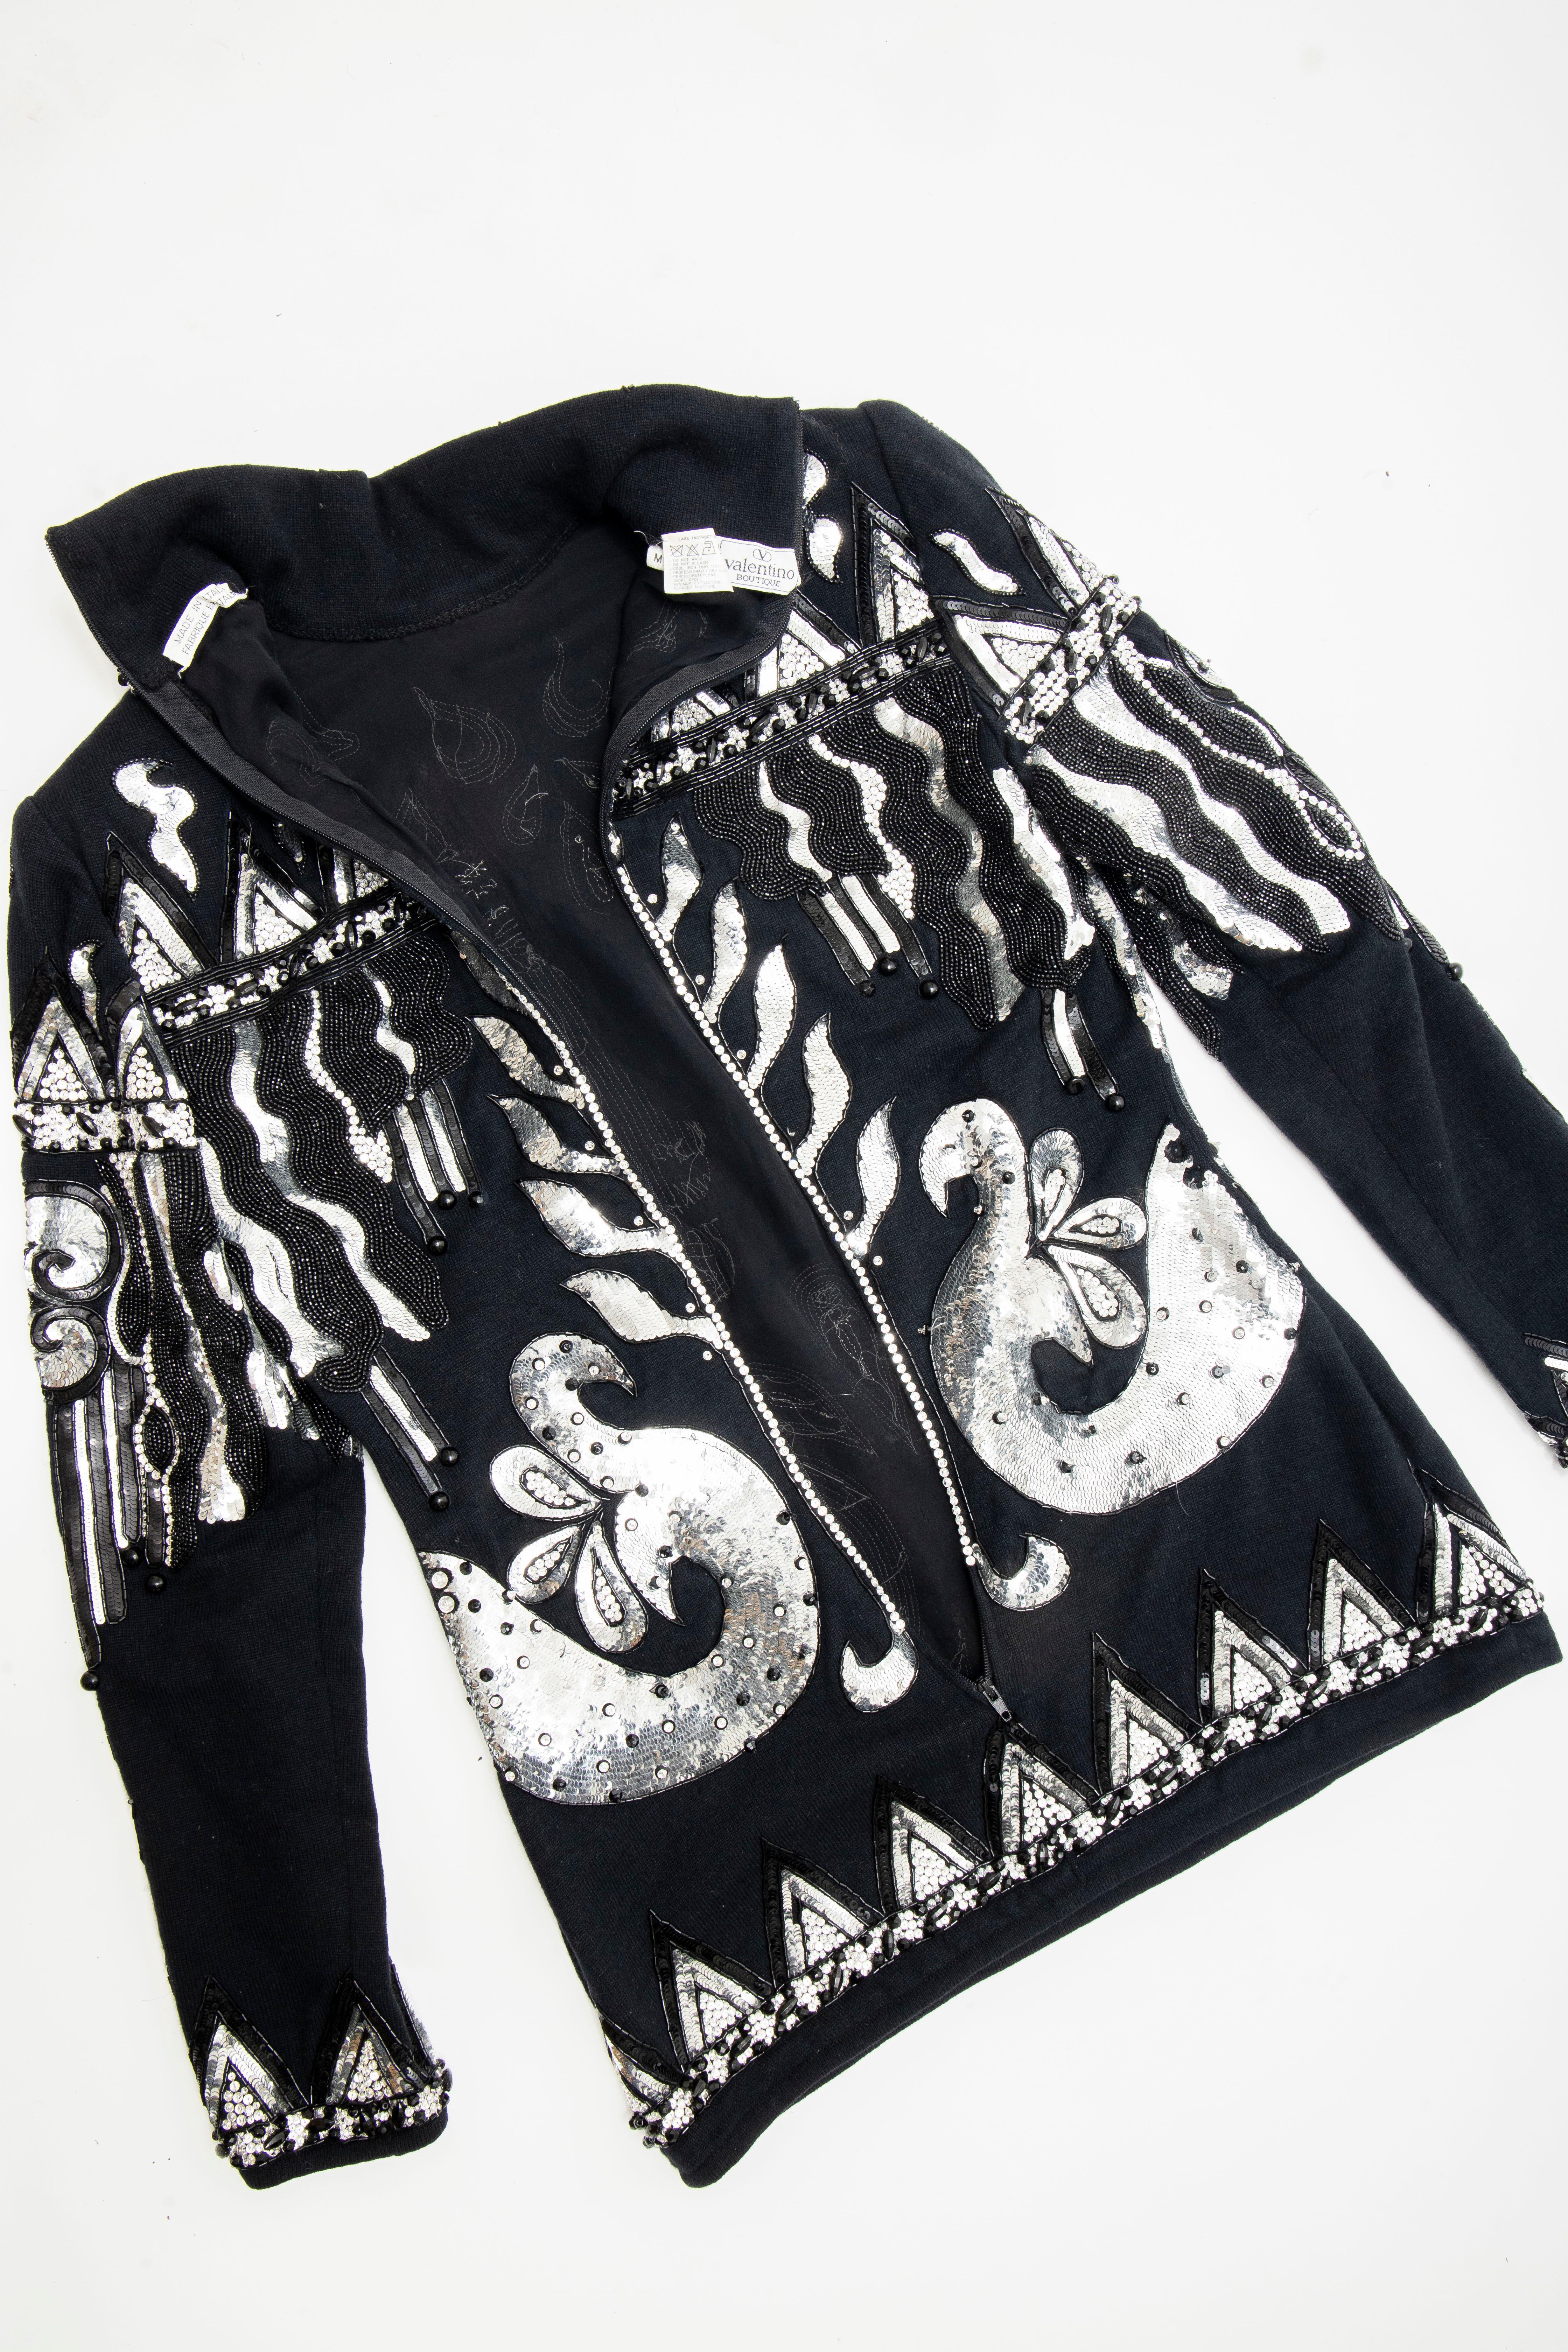 Valentino Boutique Black Wool Embroidered Silver Sequins Sweater, Fall 1989-90 12